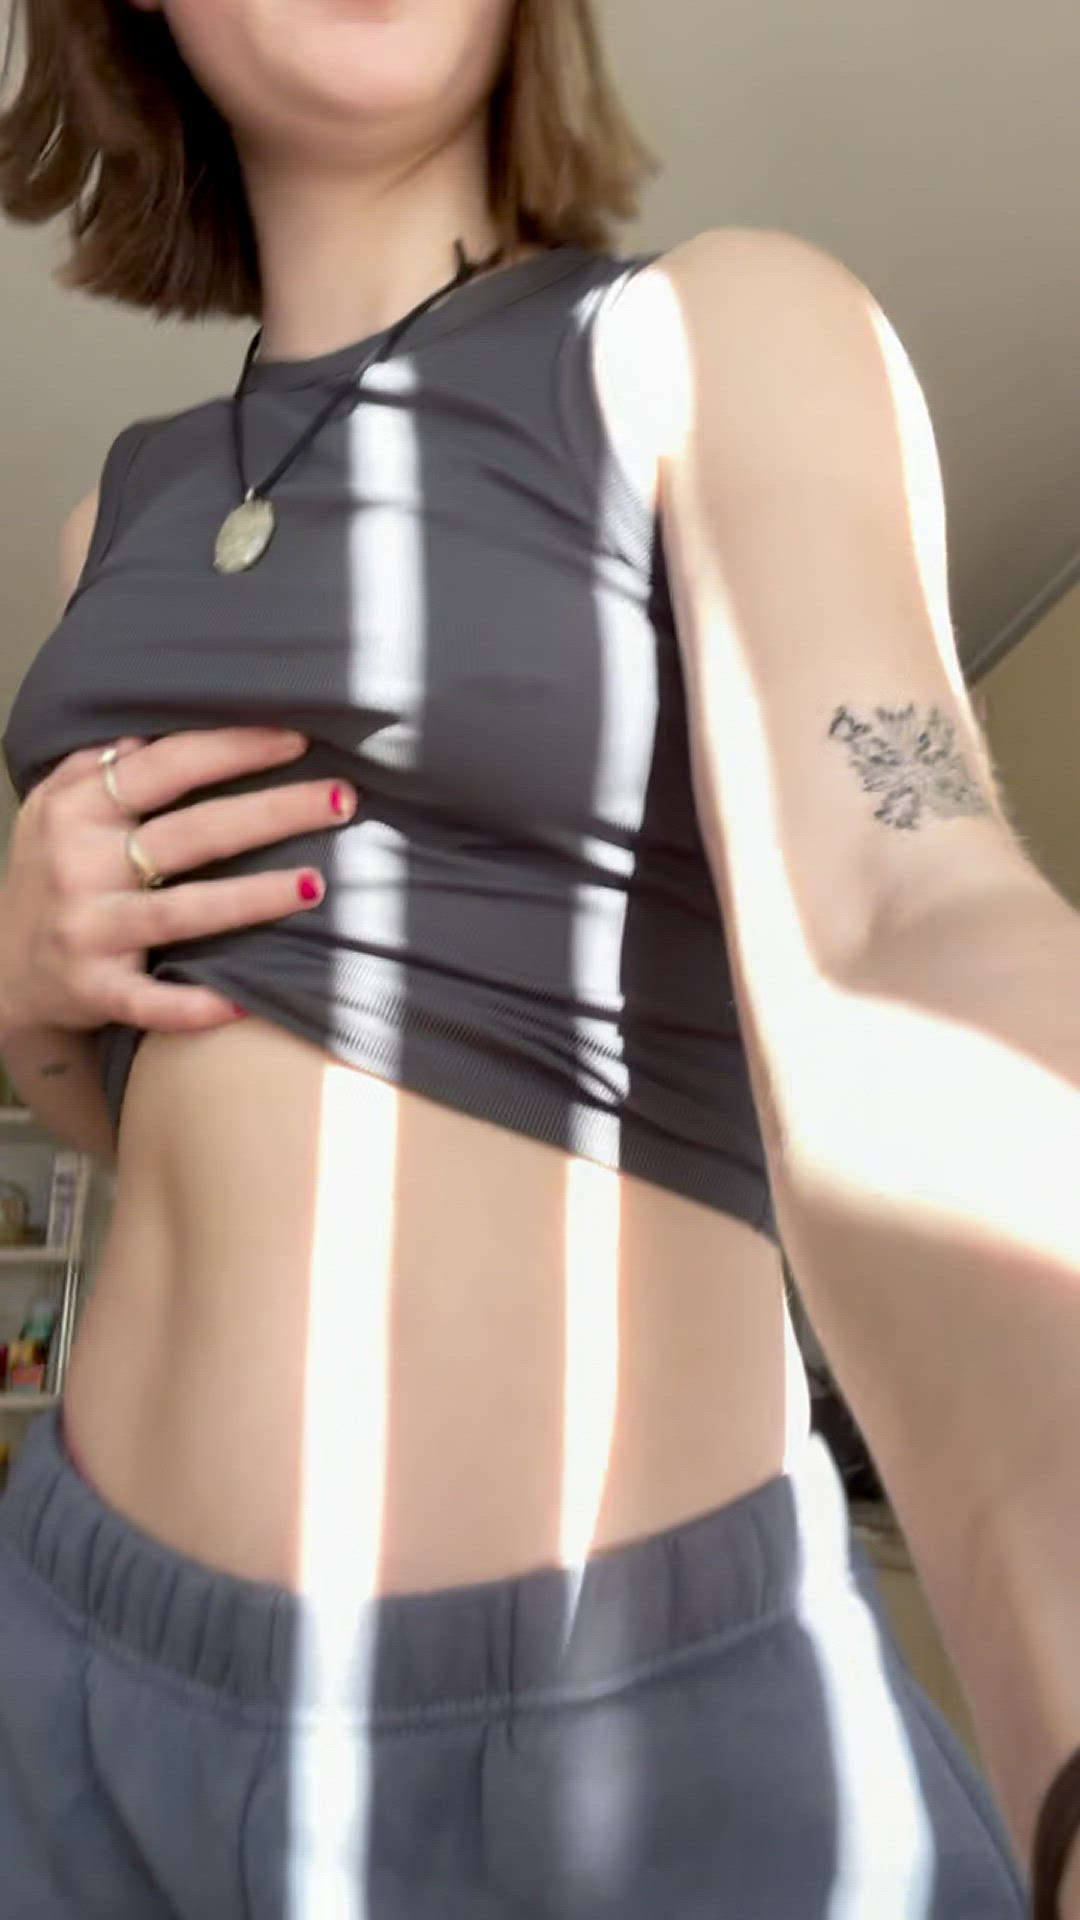 Ass porn video with onlyfans model skinxskin <strong>@skinxskin</strong>